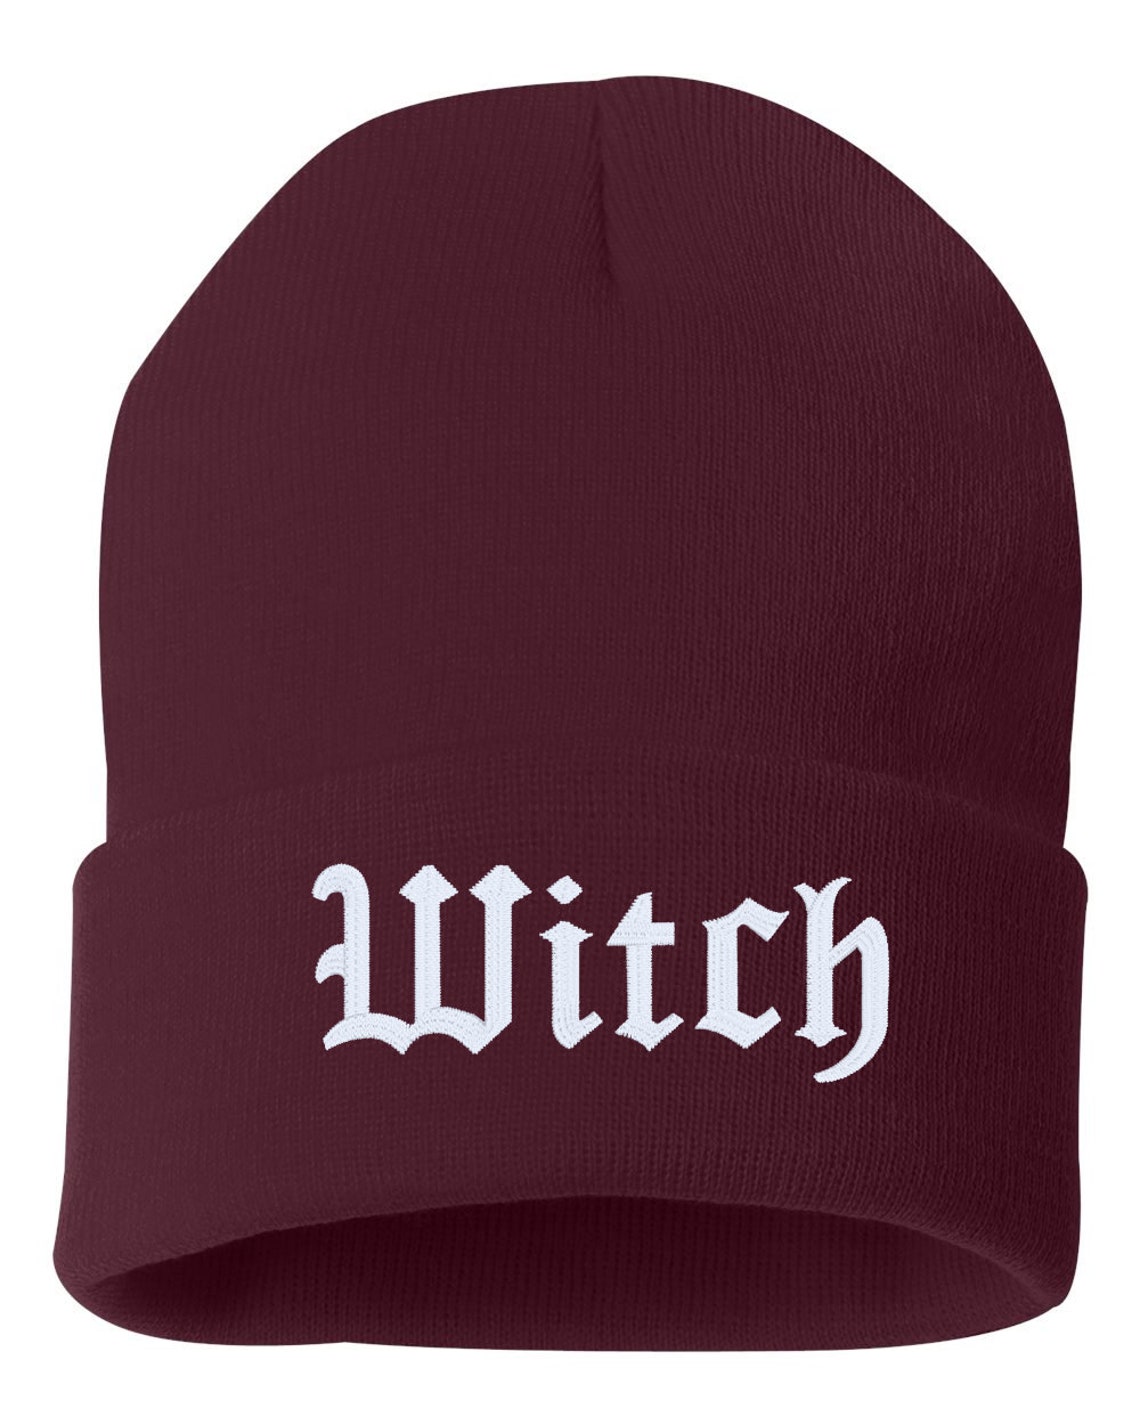 WITCH Cuffed Embroidered Beanie Hat Embroidered Gift | Etsy